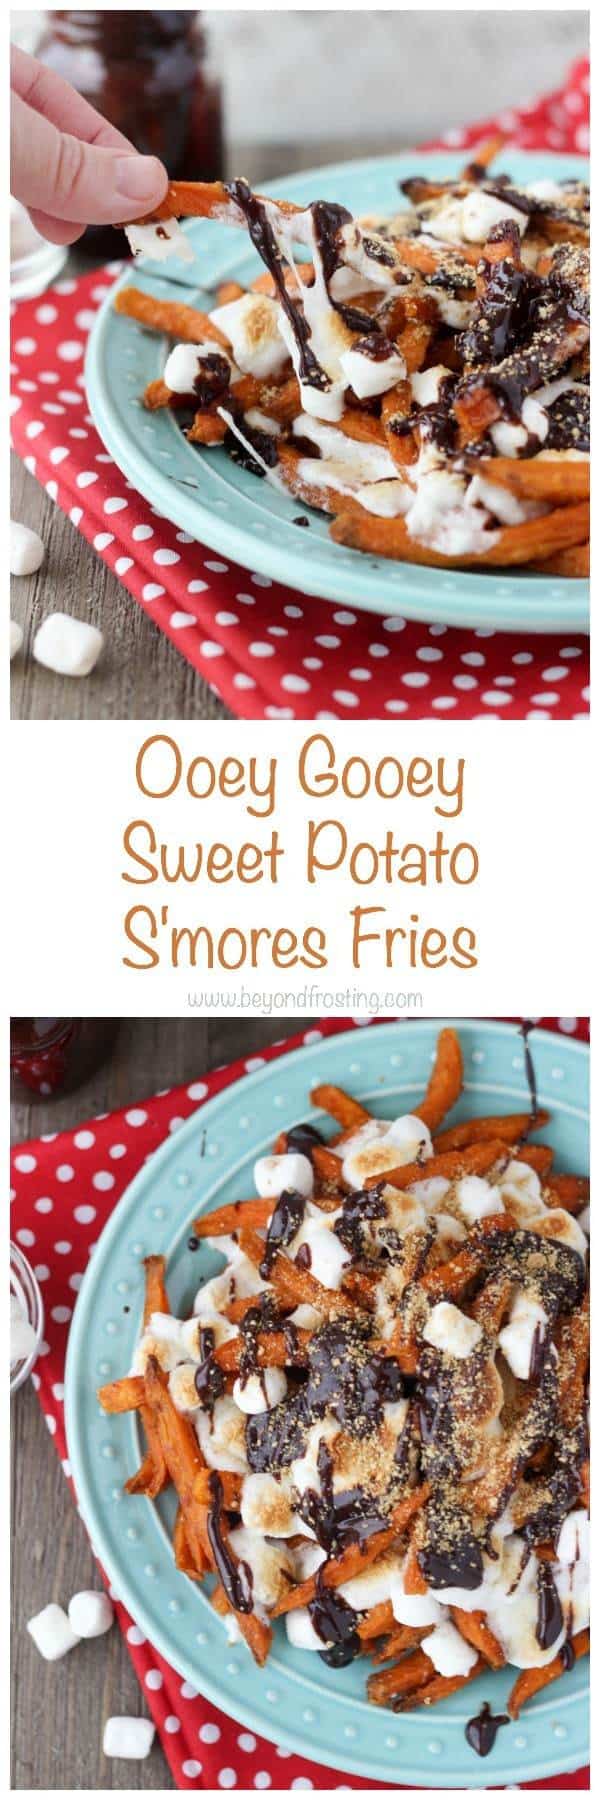 Ooey Gooey Sweet Potato S’mores Fries. Layers of crispy sweet potato fries & melted marshmallow drizzled with chocolate and crushed graham crackers. This sweet potato dessert is perfect for your next party!